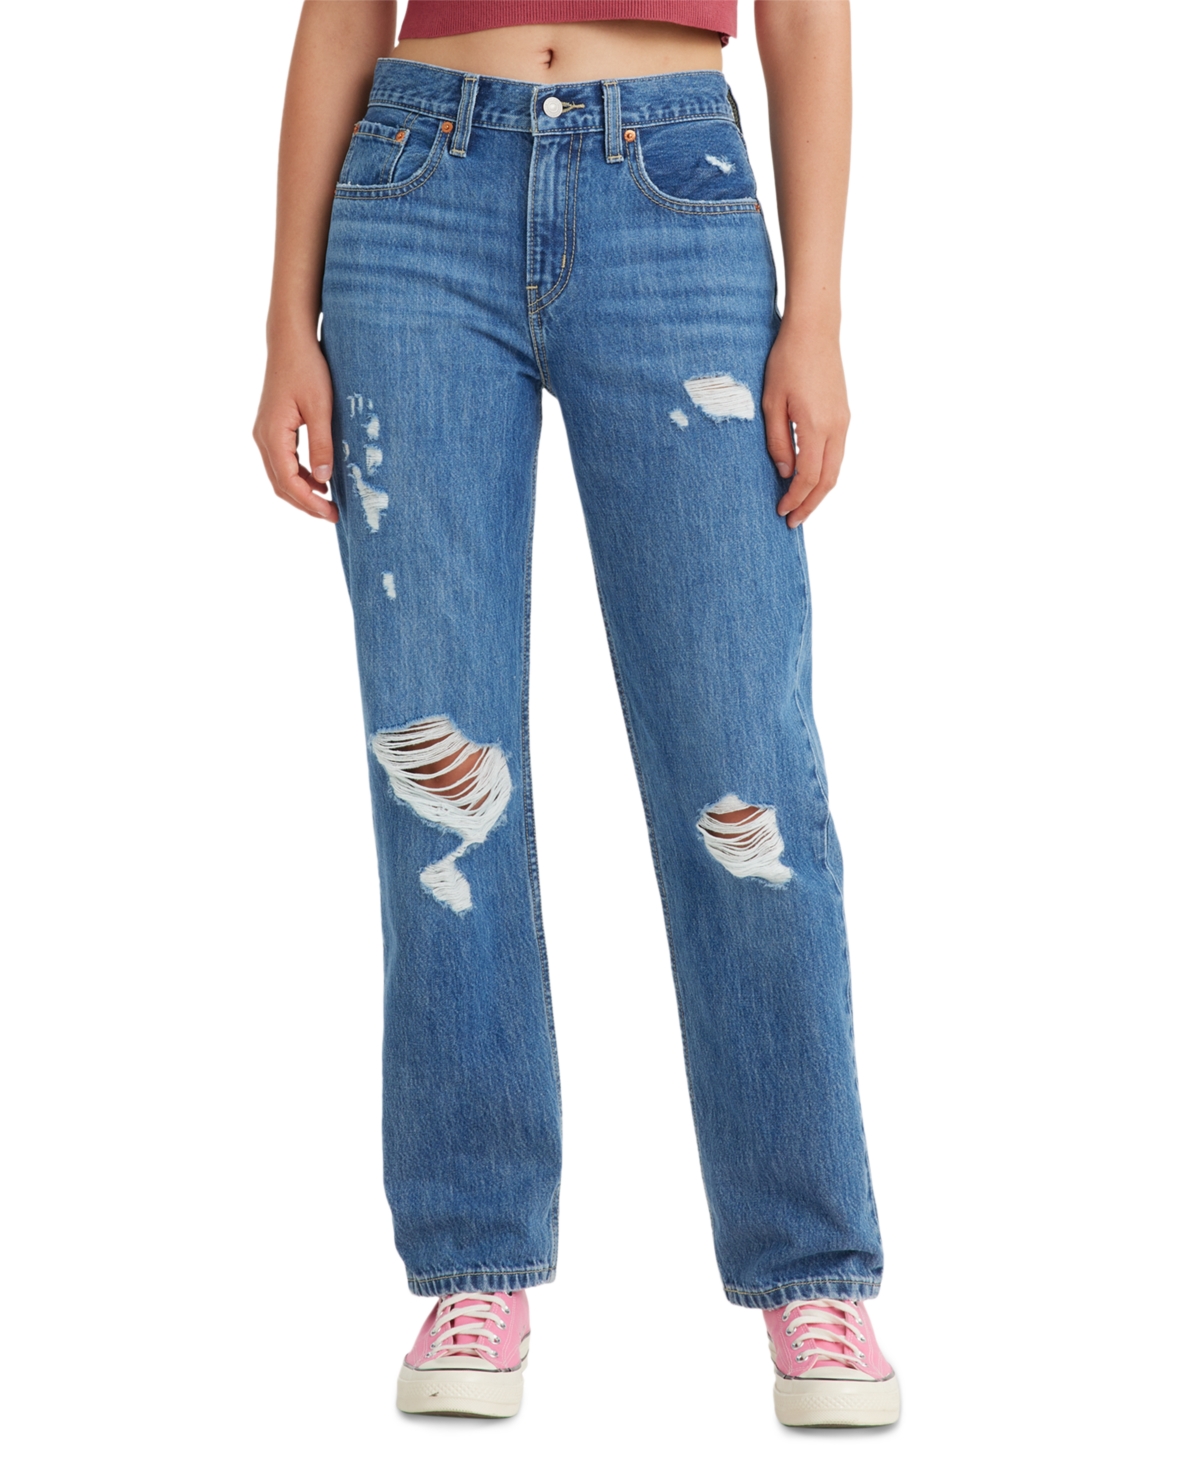 Low Pro Classic Straight-Leg High Rise Jeans - No Words